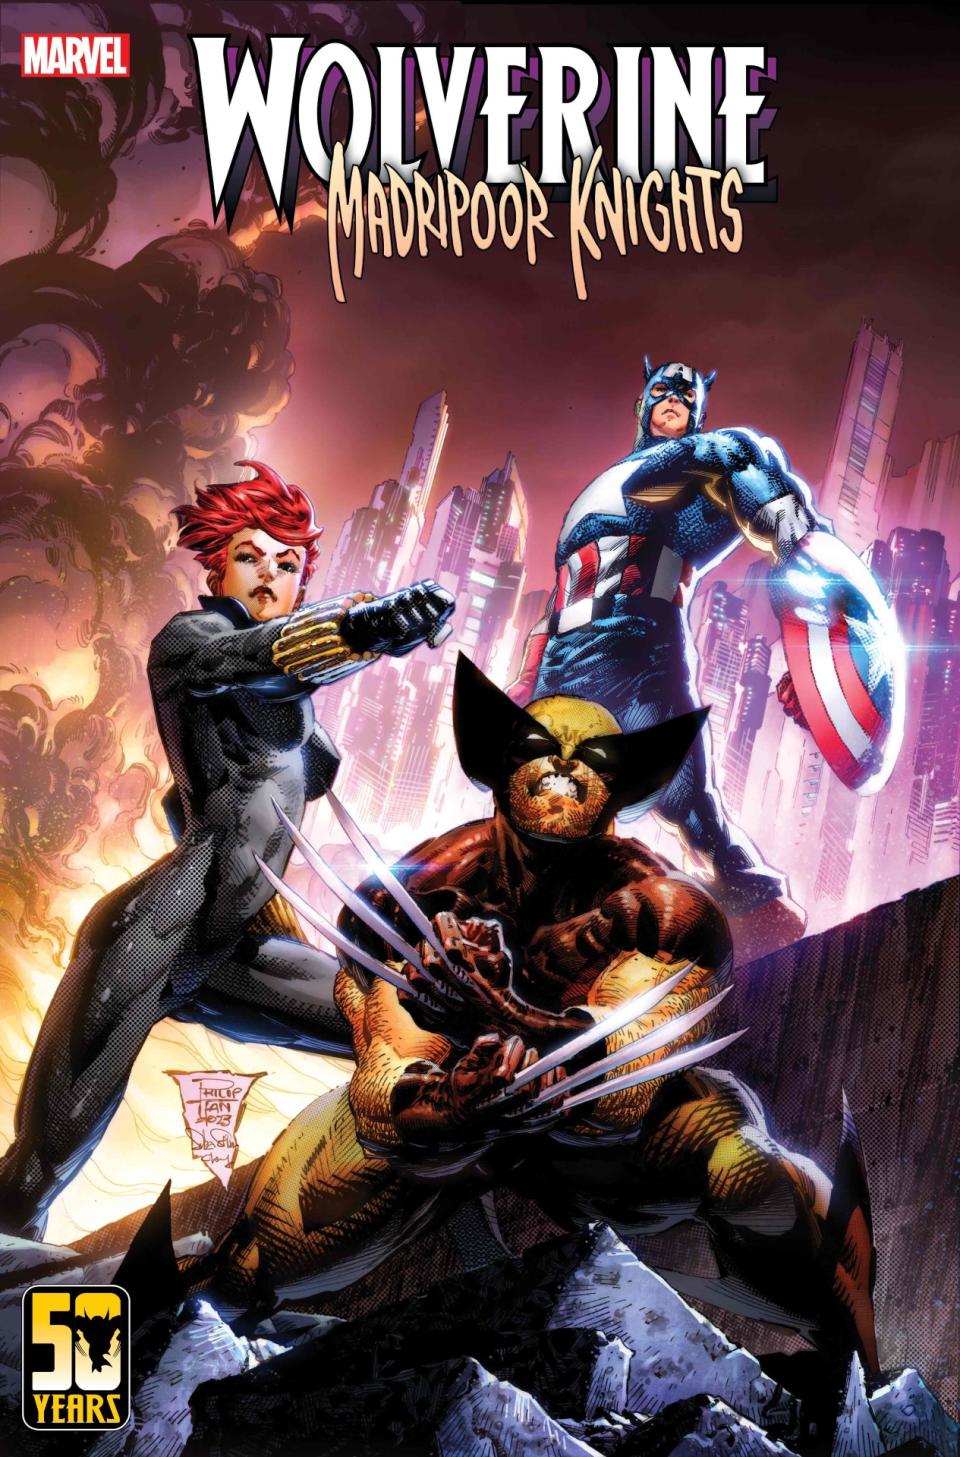 Wolverine: Madripoor Knights #1 cover art by Philip Tan